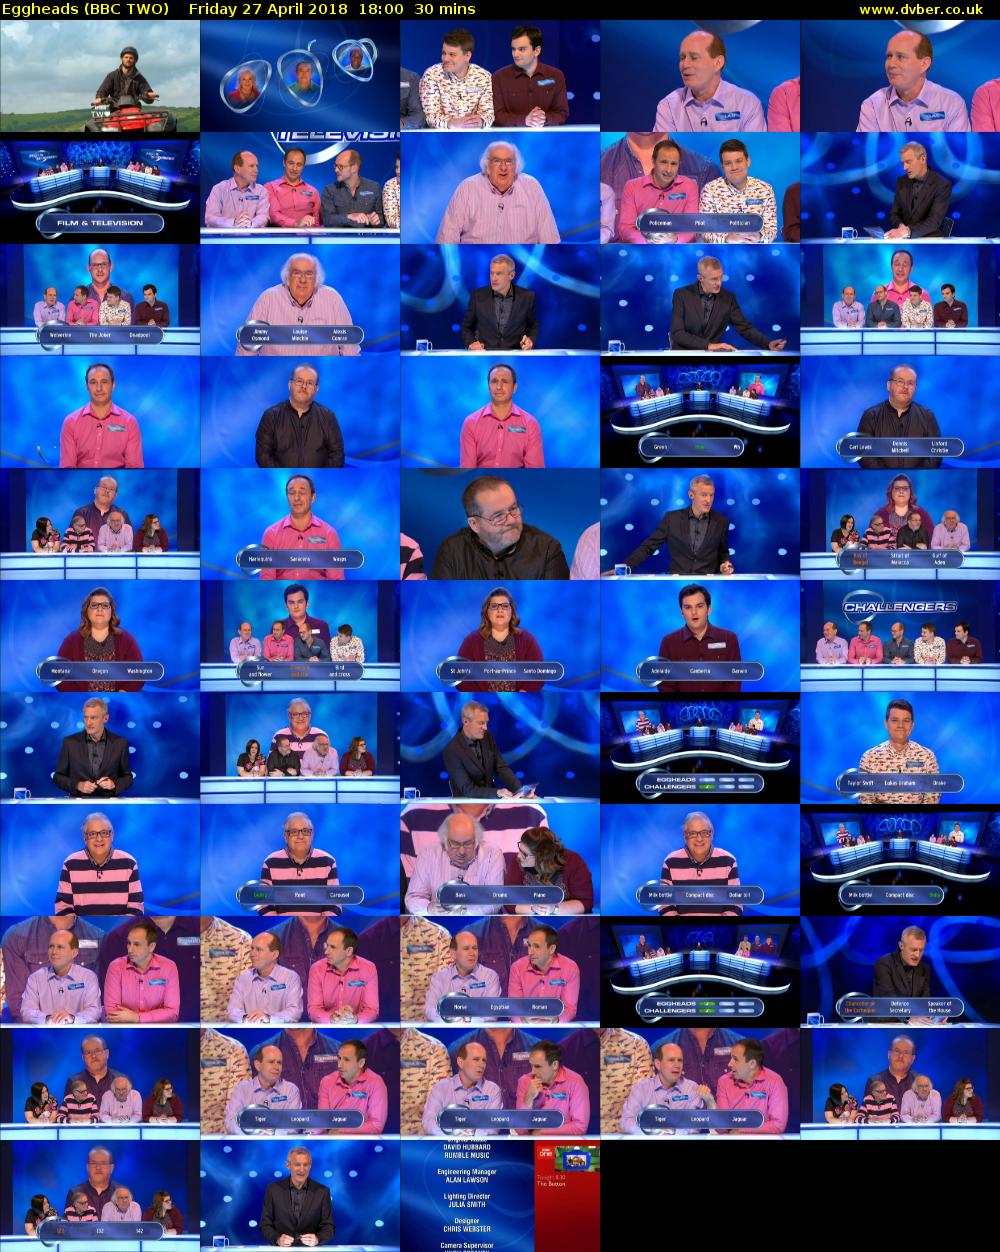 Eggheads (BBC TWO) Friday 27 April 2018 18:00 - 18:30